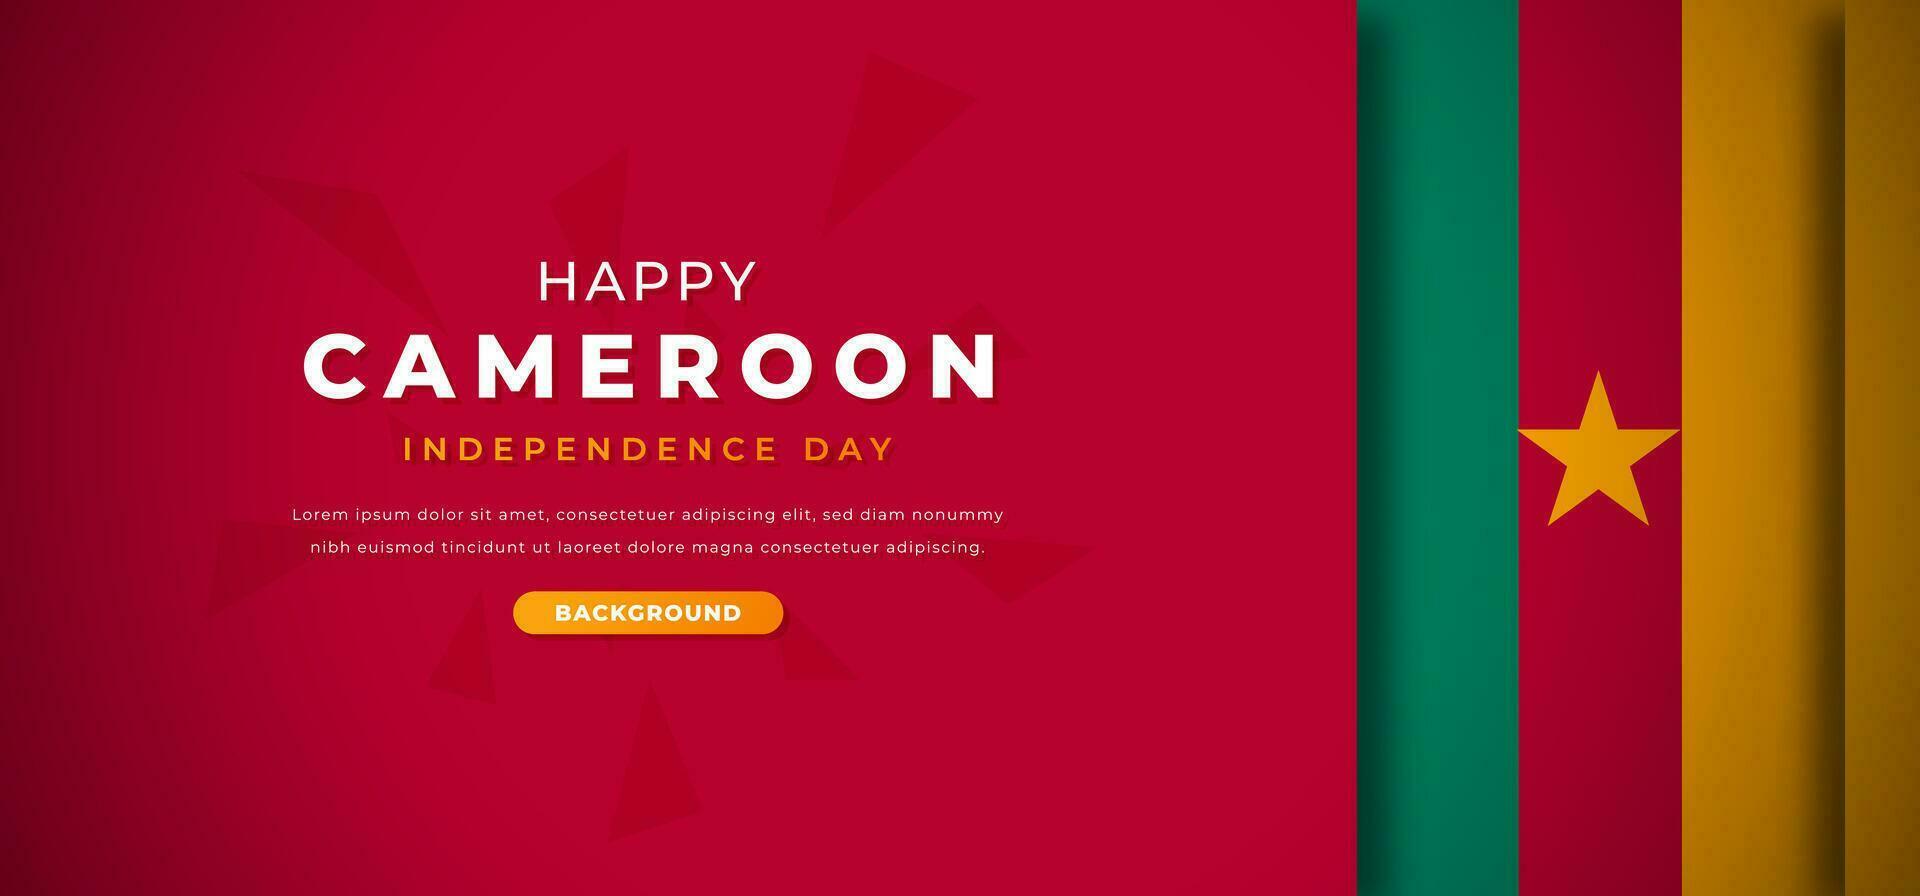 Happy Cameroon Independence Day Design Paper Cut Shapes Background Illustration for Poster, Banner, Advertising, Greeting Card vector